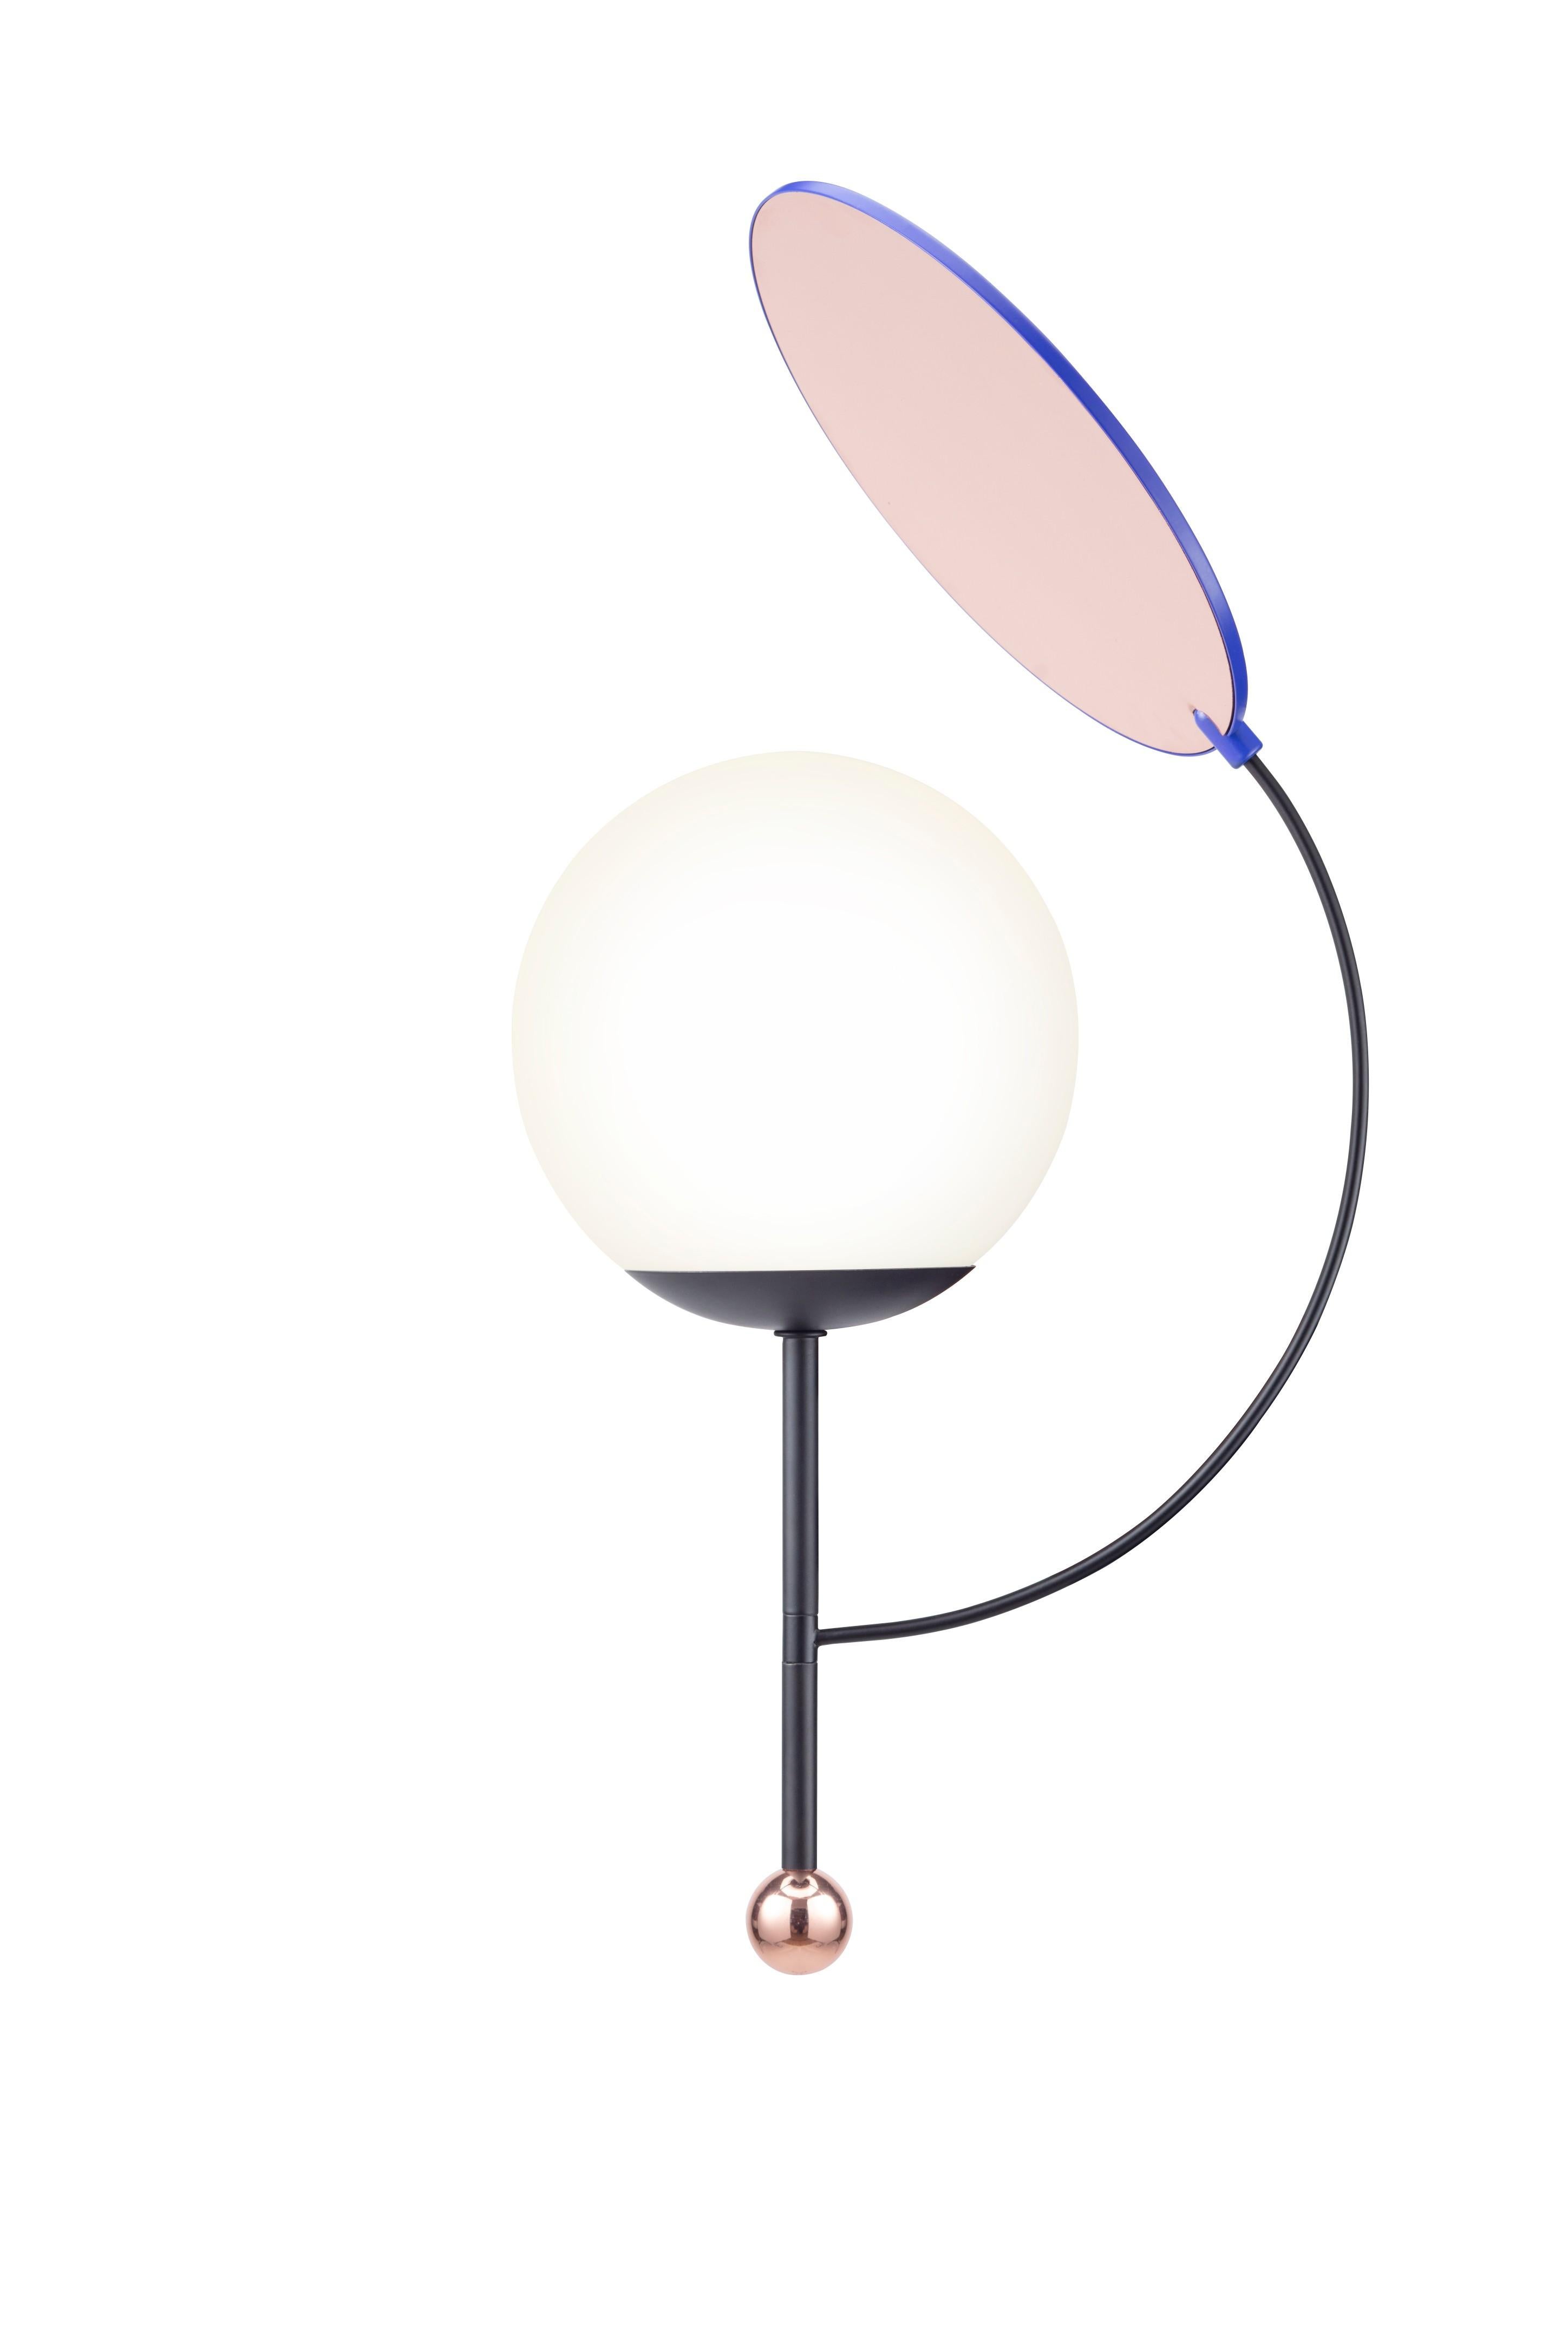 Colorful wall lamp by Thomas Dariel, Maison Dada
Measures: diameter 24 * height 57.2 cm
Base and arm – Black powder coated metal with matte finish
Plated metal ball coated with glossy Copper finish
Rotating Top – Blue powder coated metal /